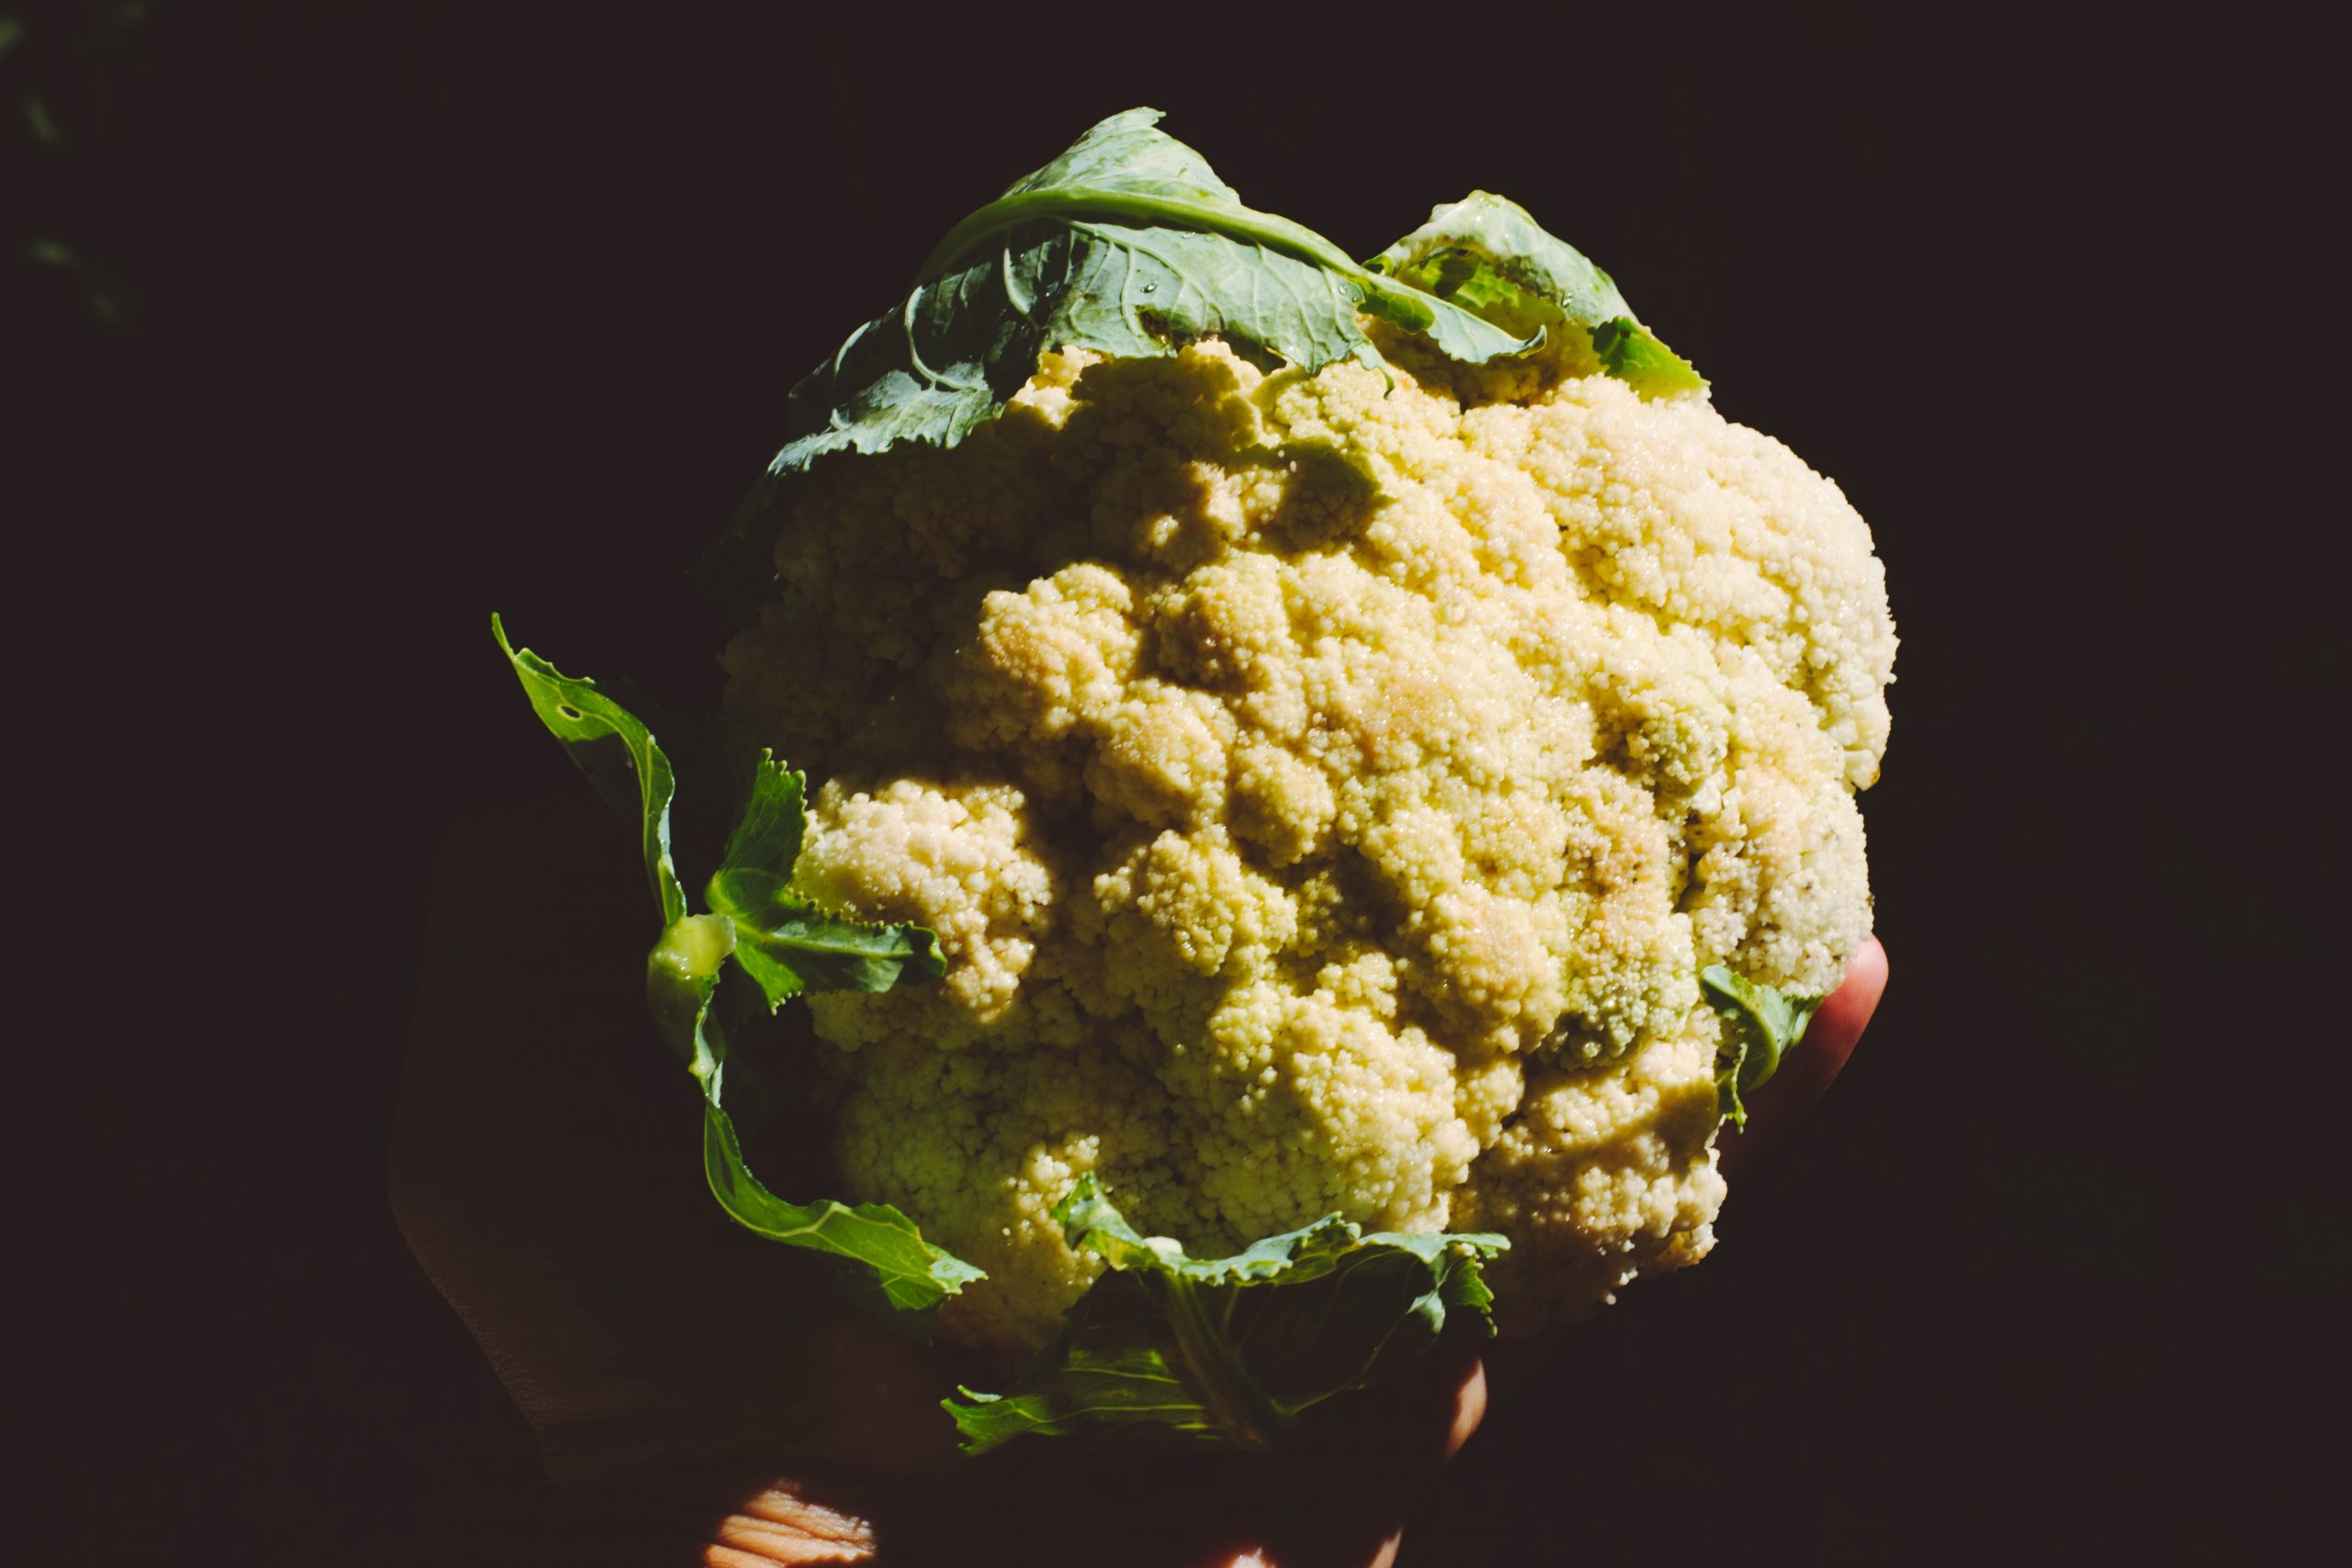 Why is My Cauliflower Yellow? And What Can I Do To Fix It?